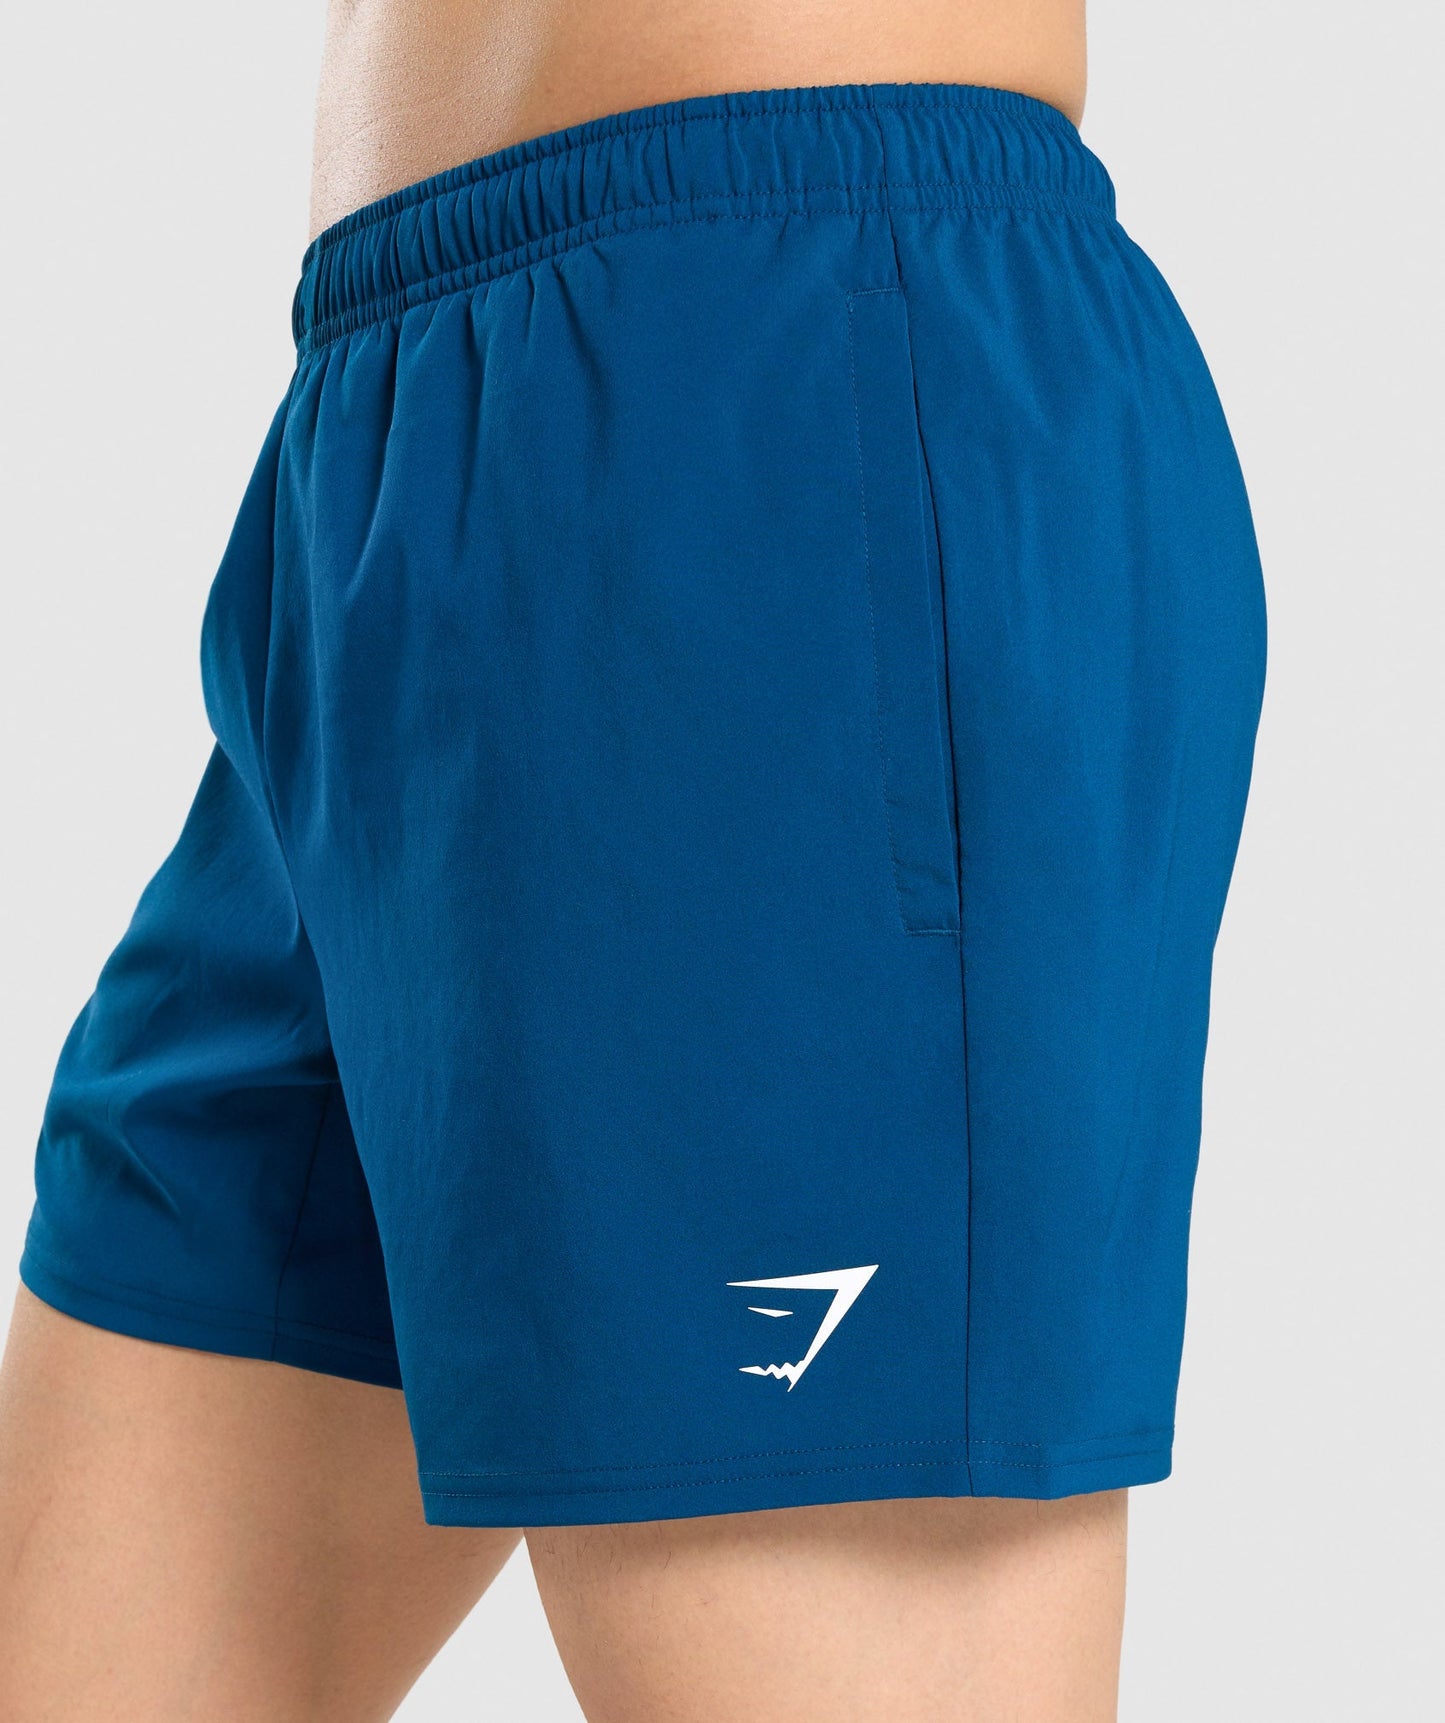 Gymshark Arrival 5 Shorts - Petrol Blue – Client 446 100K products